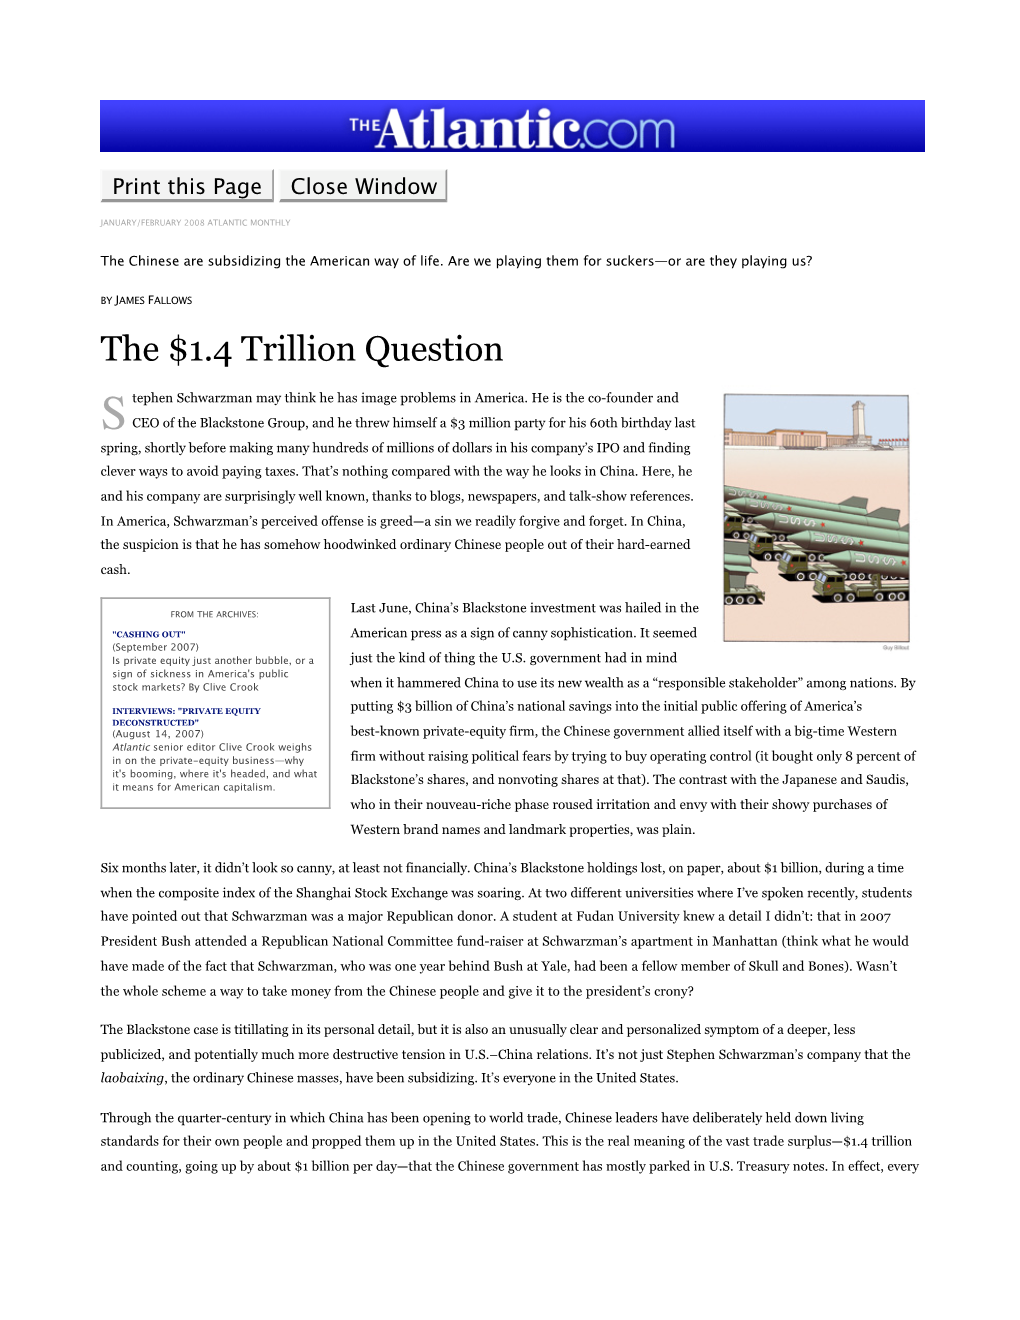 The Atlantic Online | January/February 2008 | the $1.4 Trillion Question | James Fallows